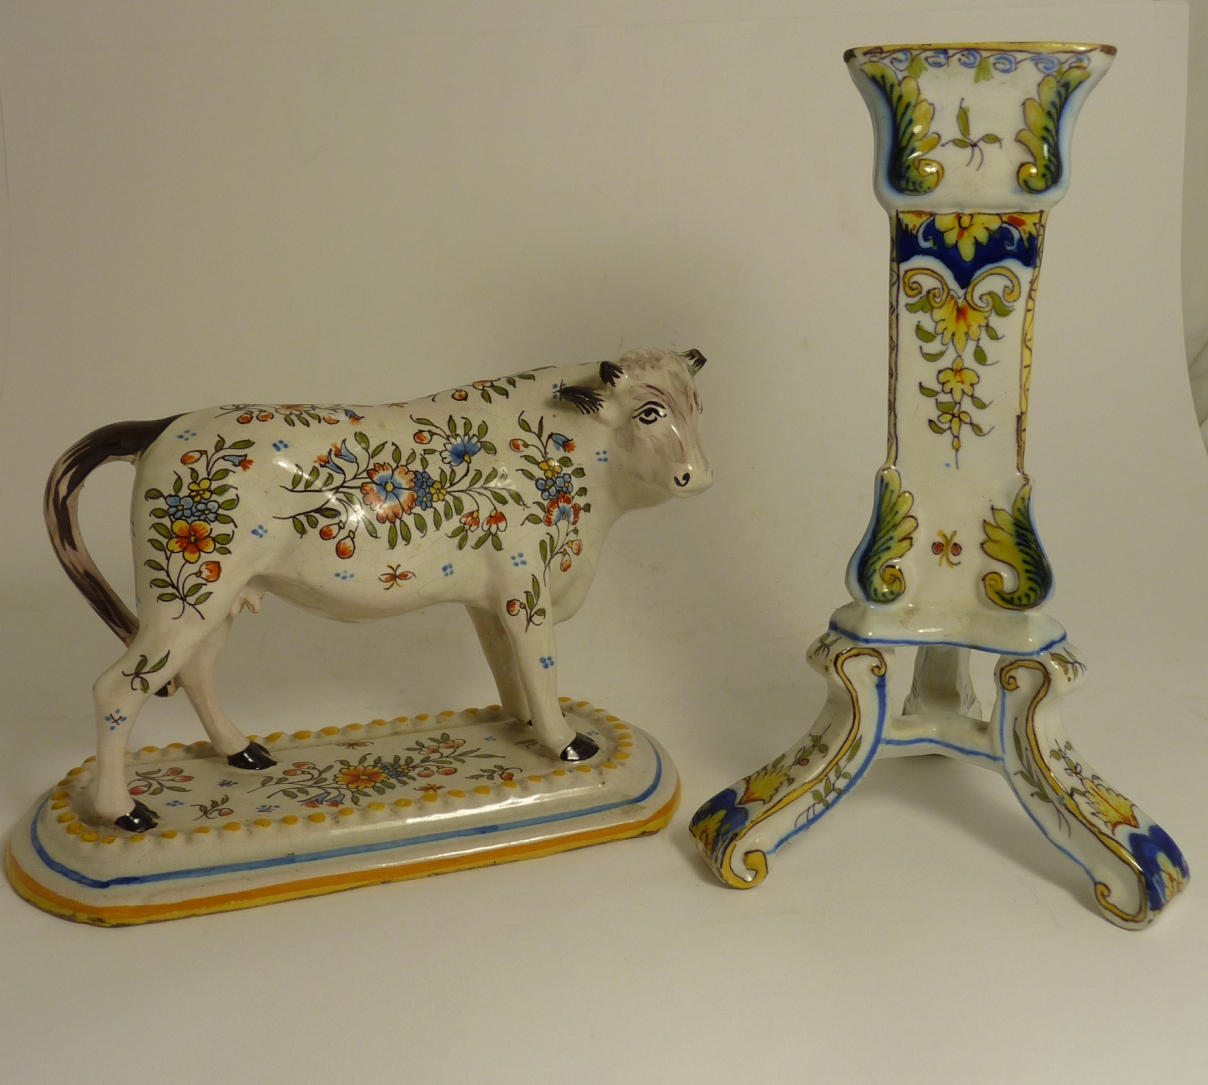 A Continental faience figure of a cow painted with floral sprigs and on rectangular base, 15cms high